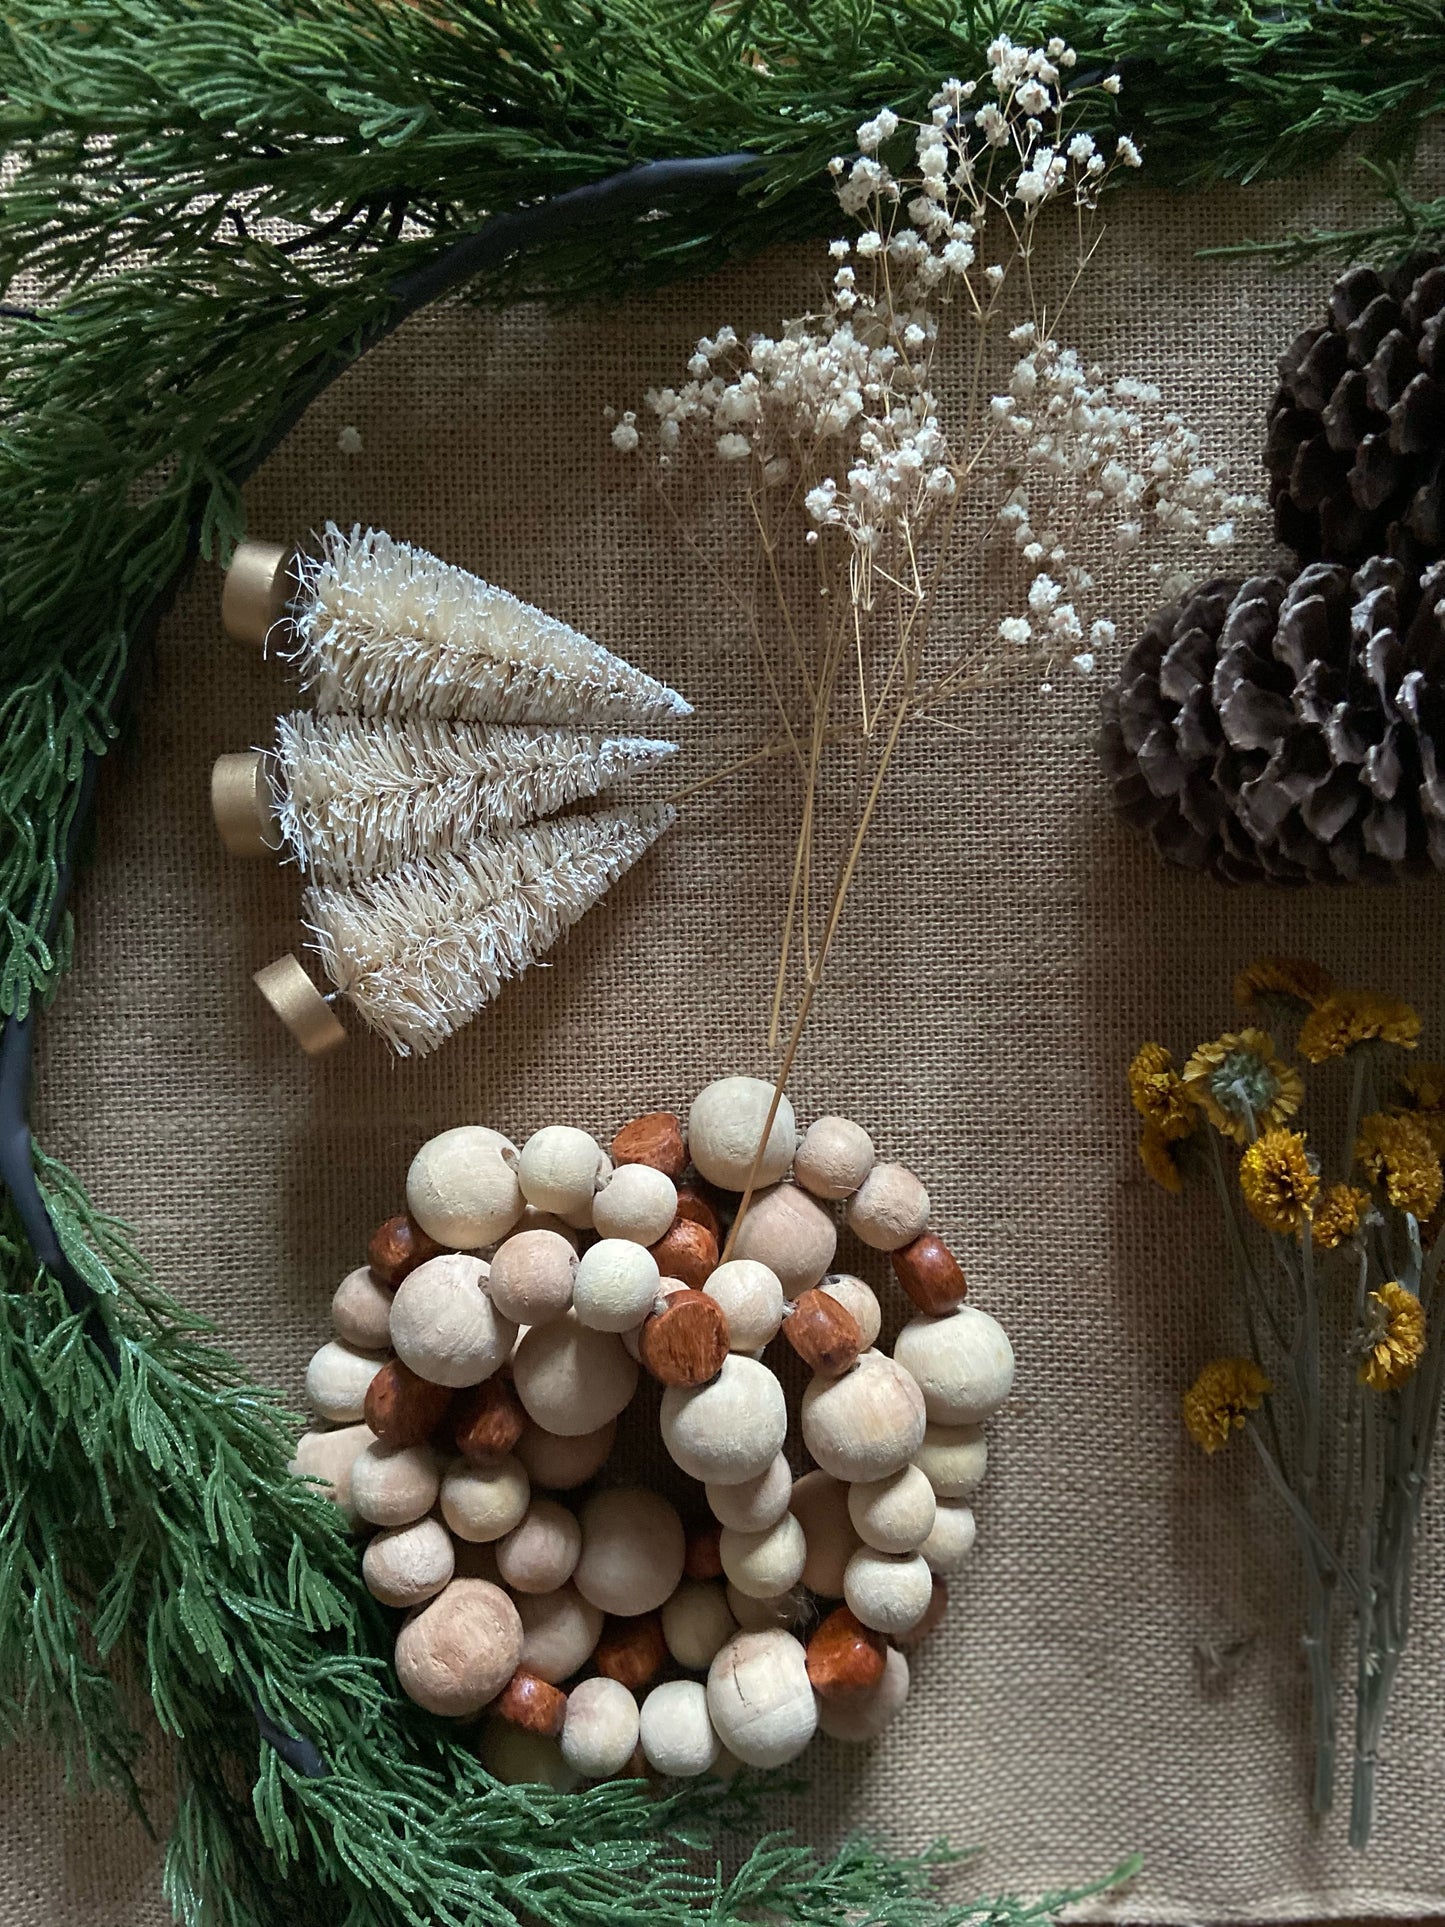 Holiday Table Setting Kit 'create your own natural tablescape'